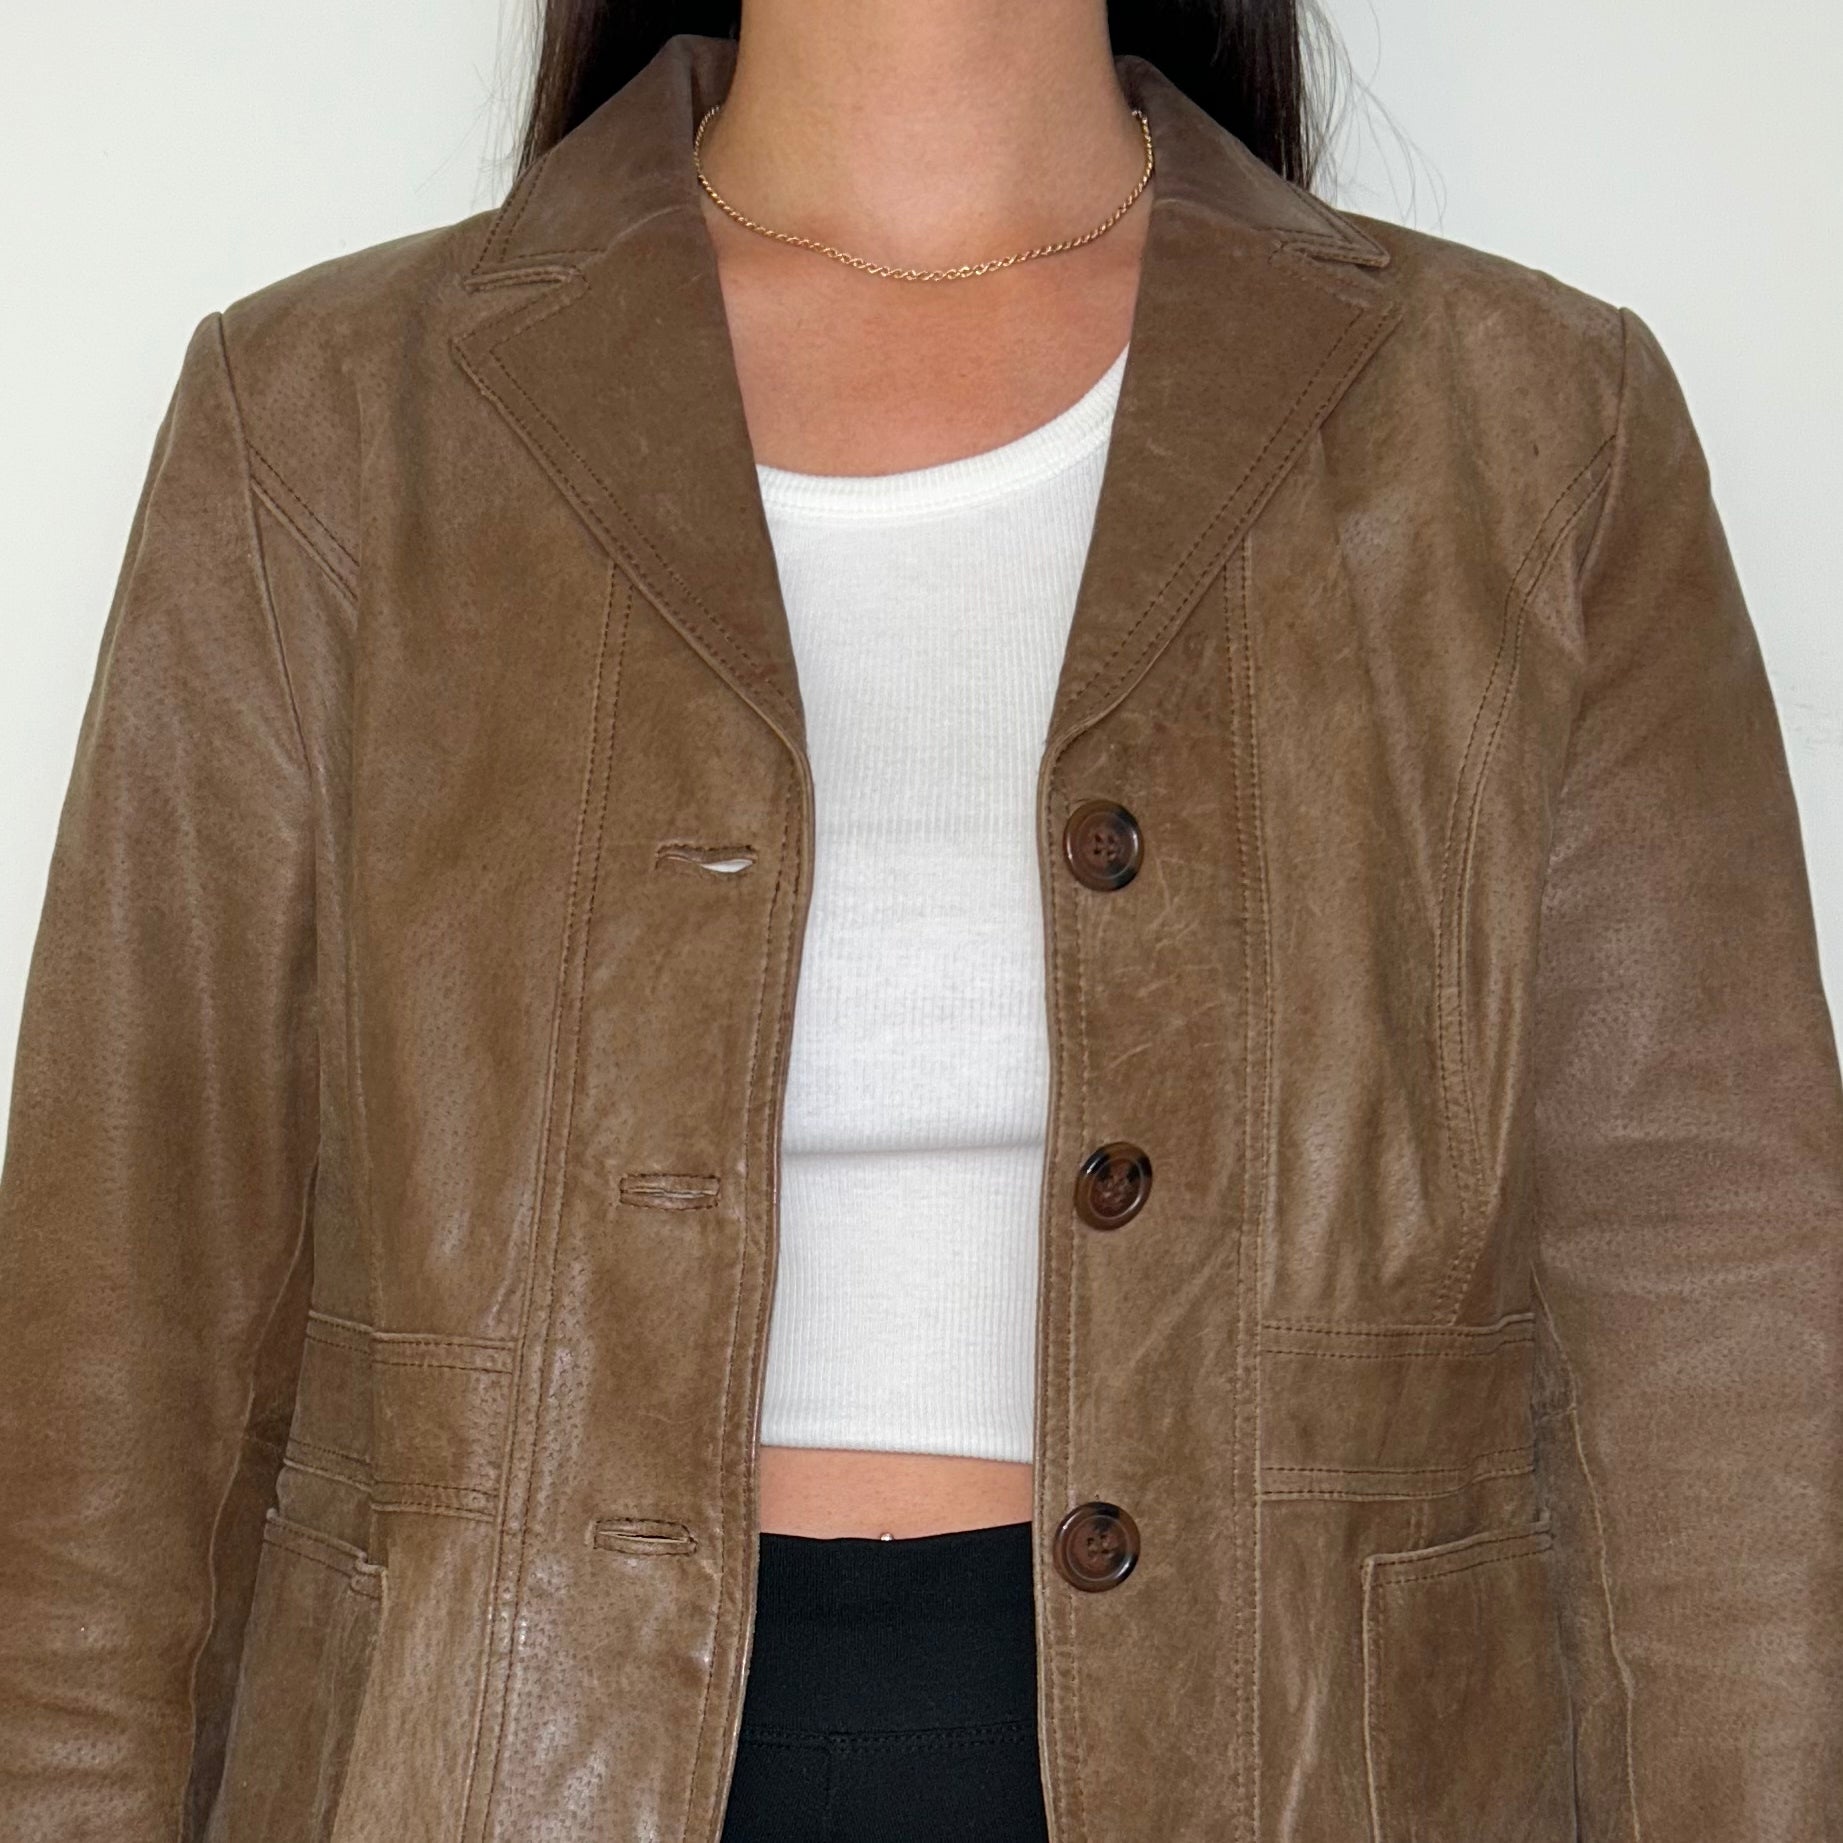 close up of brown leather blazer jacket shown on a model wearing a white crop top and black trousers